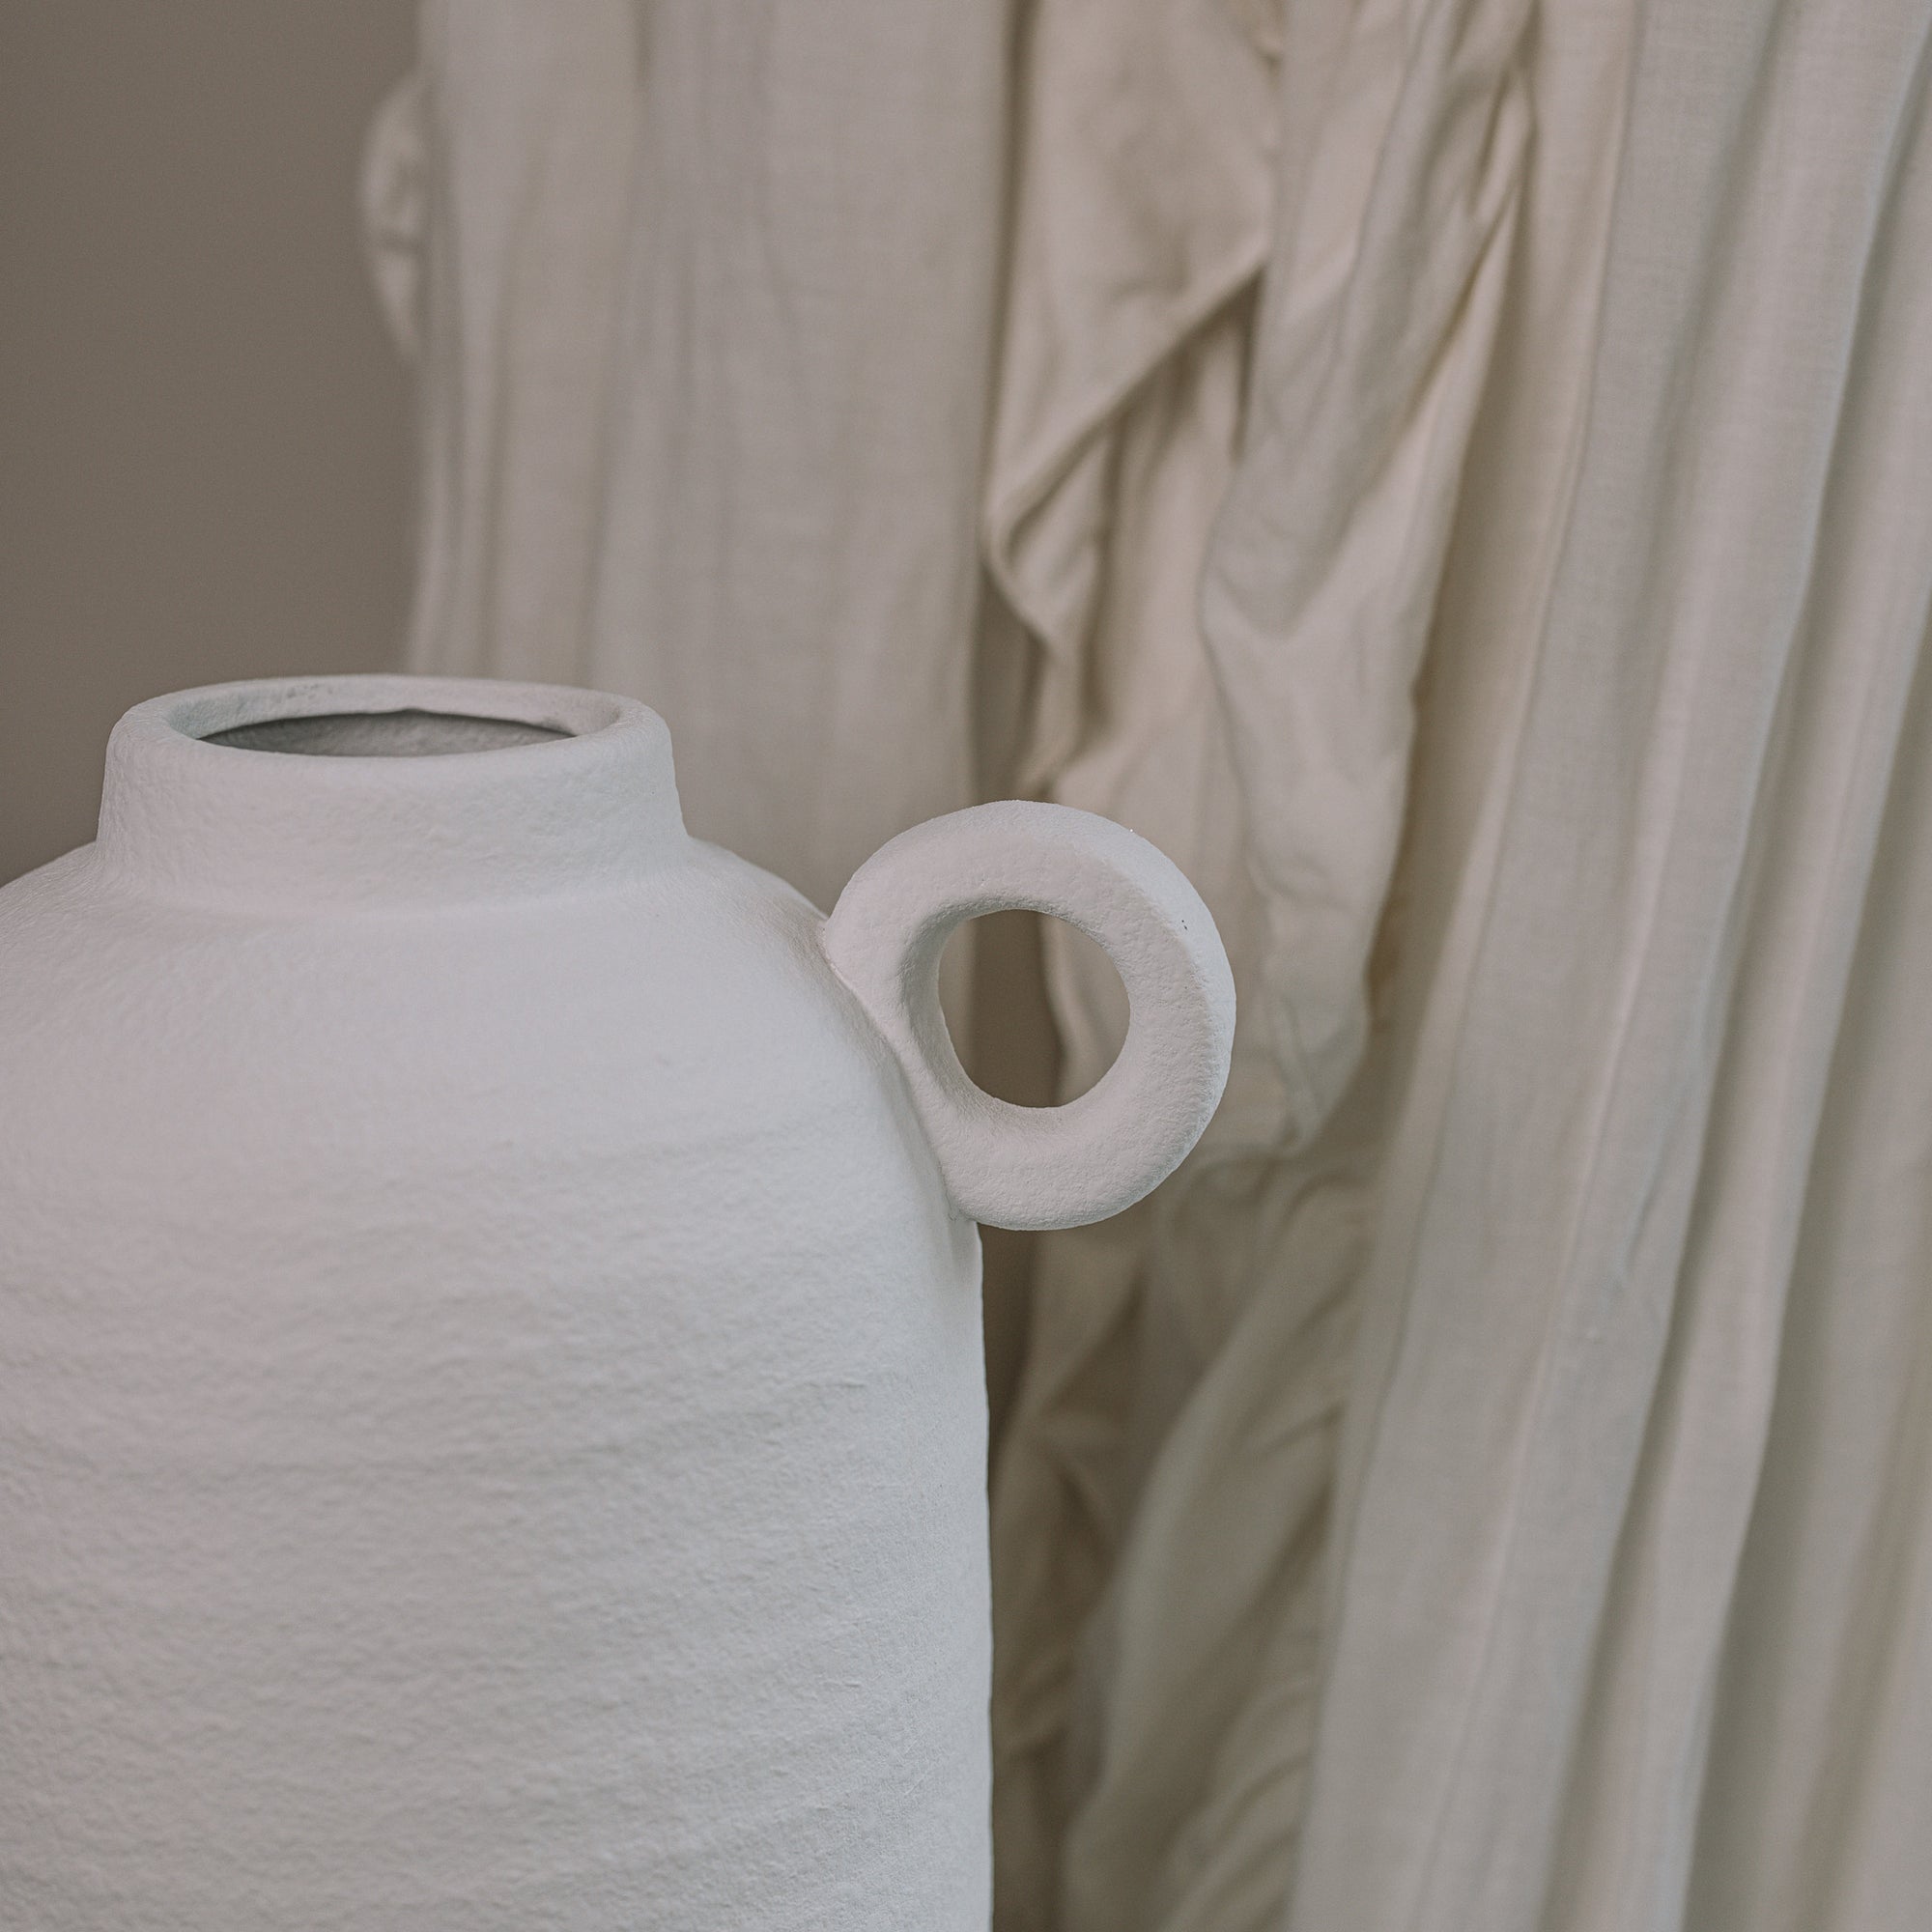 Textured White Vase against a frilly curtain. 